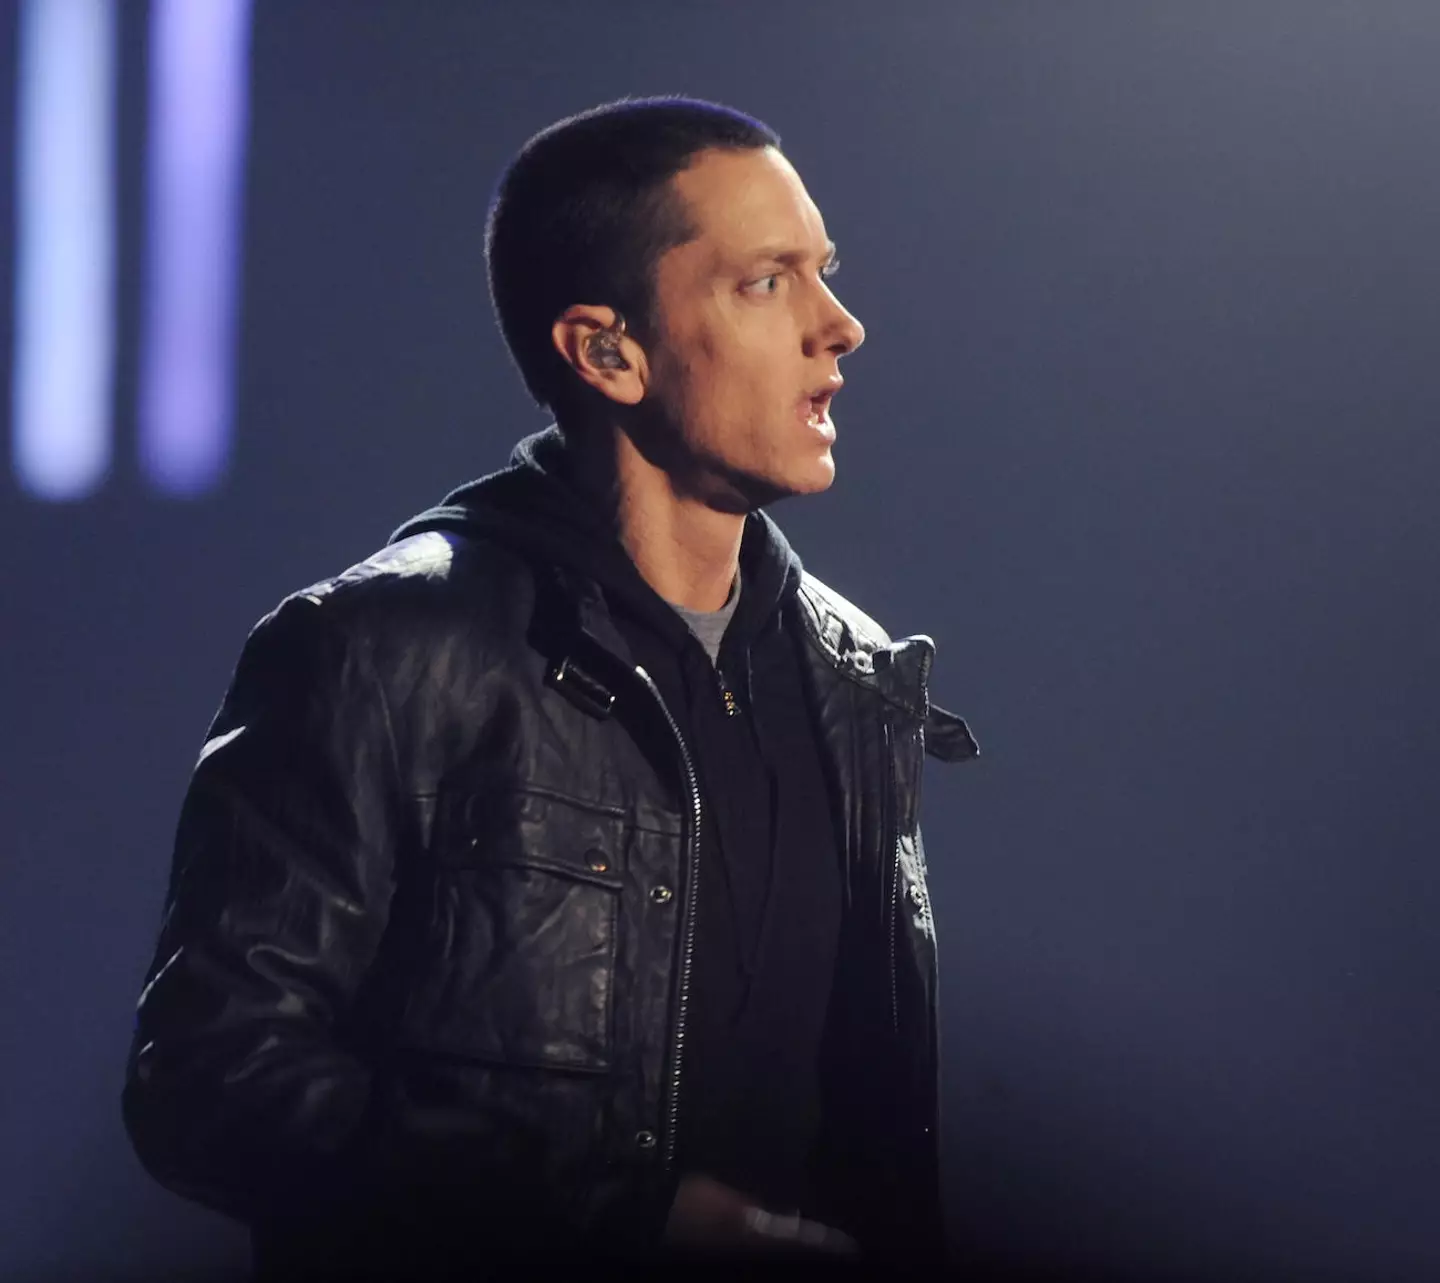 Eminem performs 'Not Afraid' at the 2010 BET Awards in Los Angeles on June 27, 2010.